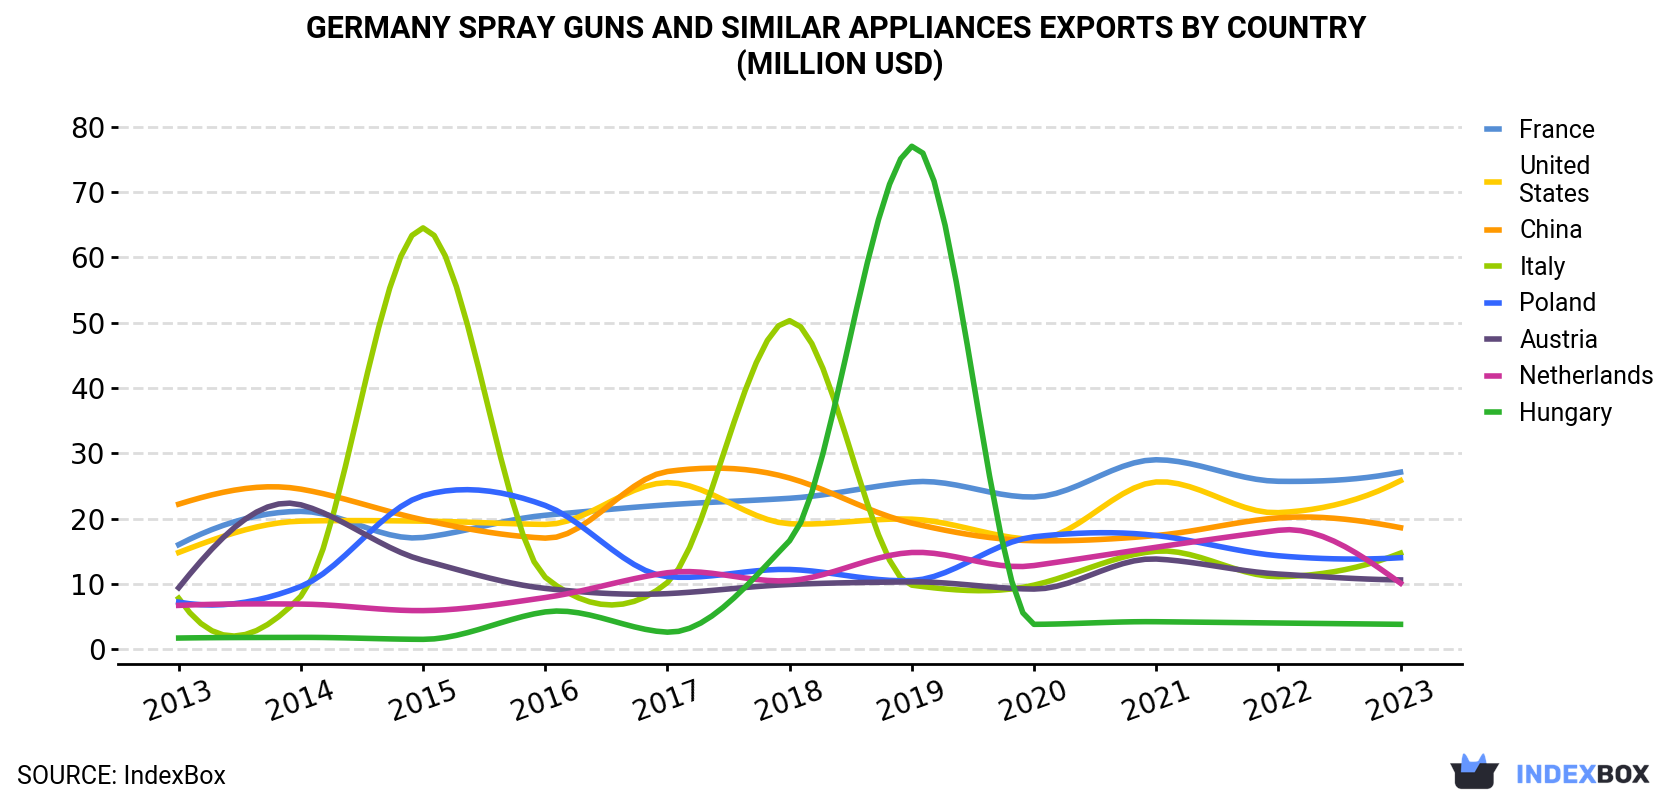 Germany Spray Guns And Similar Appliances Exports By Country (Million USD)